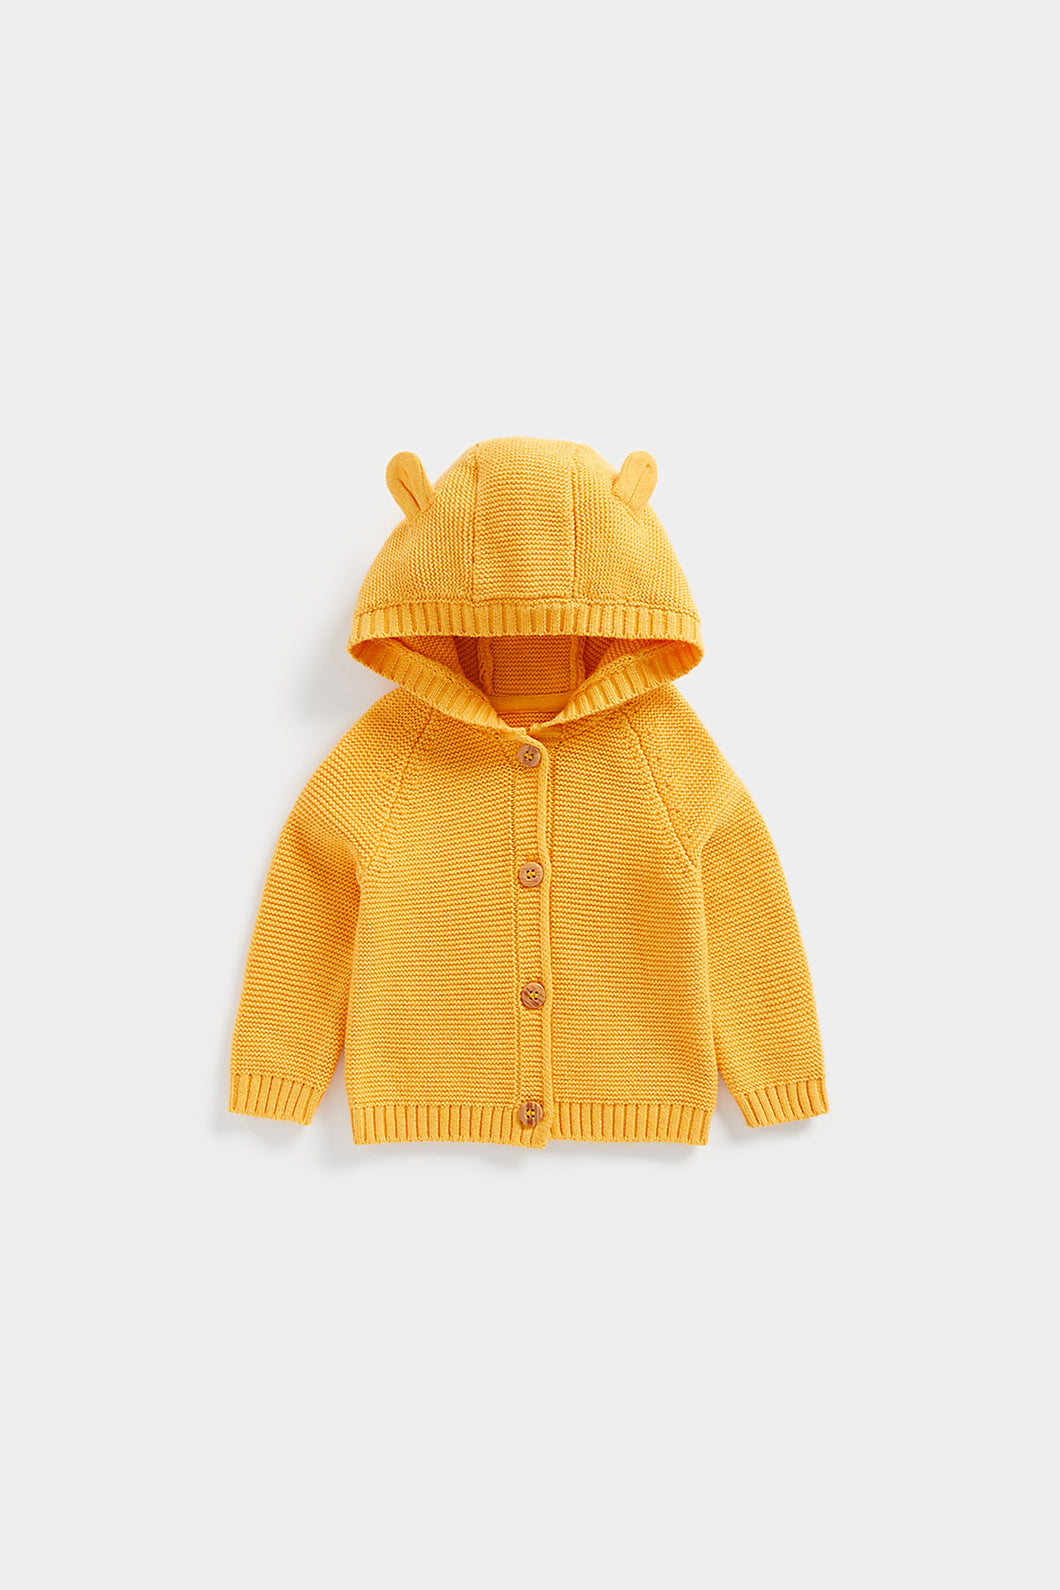 Mothercare Ochre Organic-Cotton Knitted Cardigan